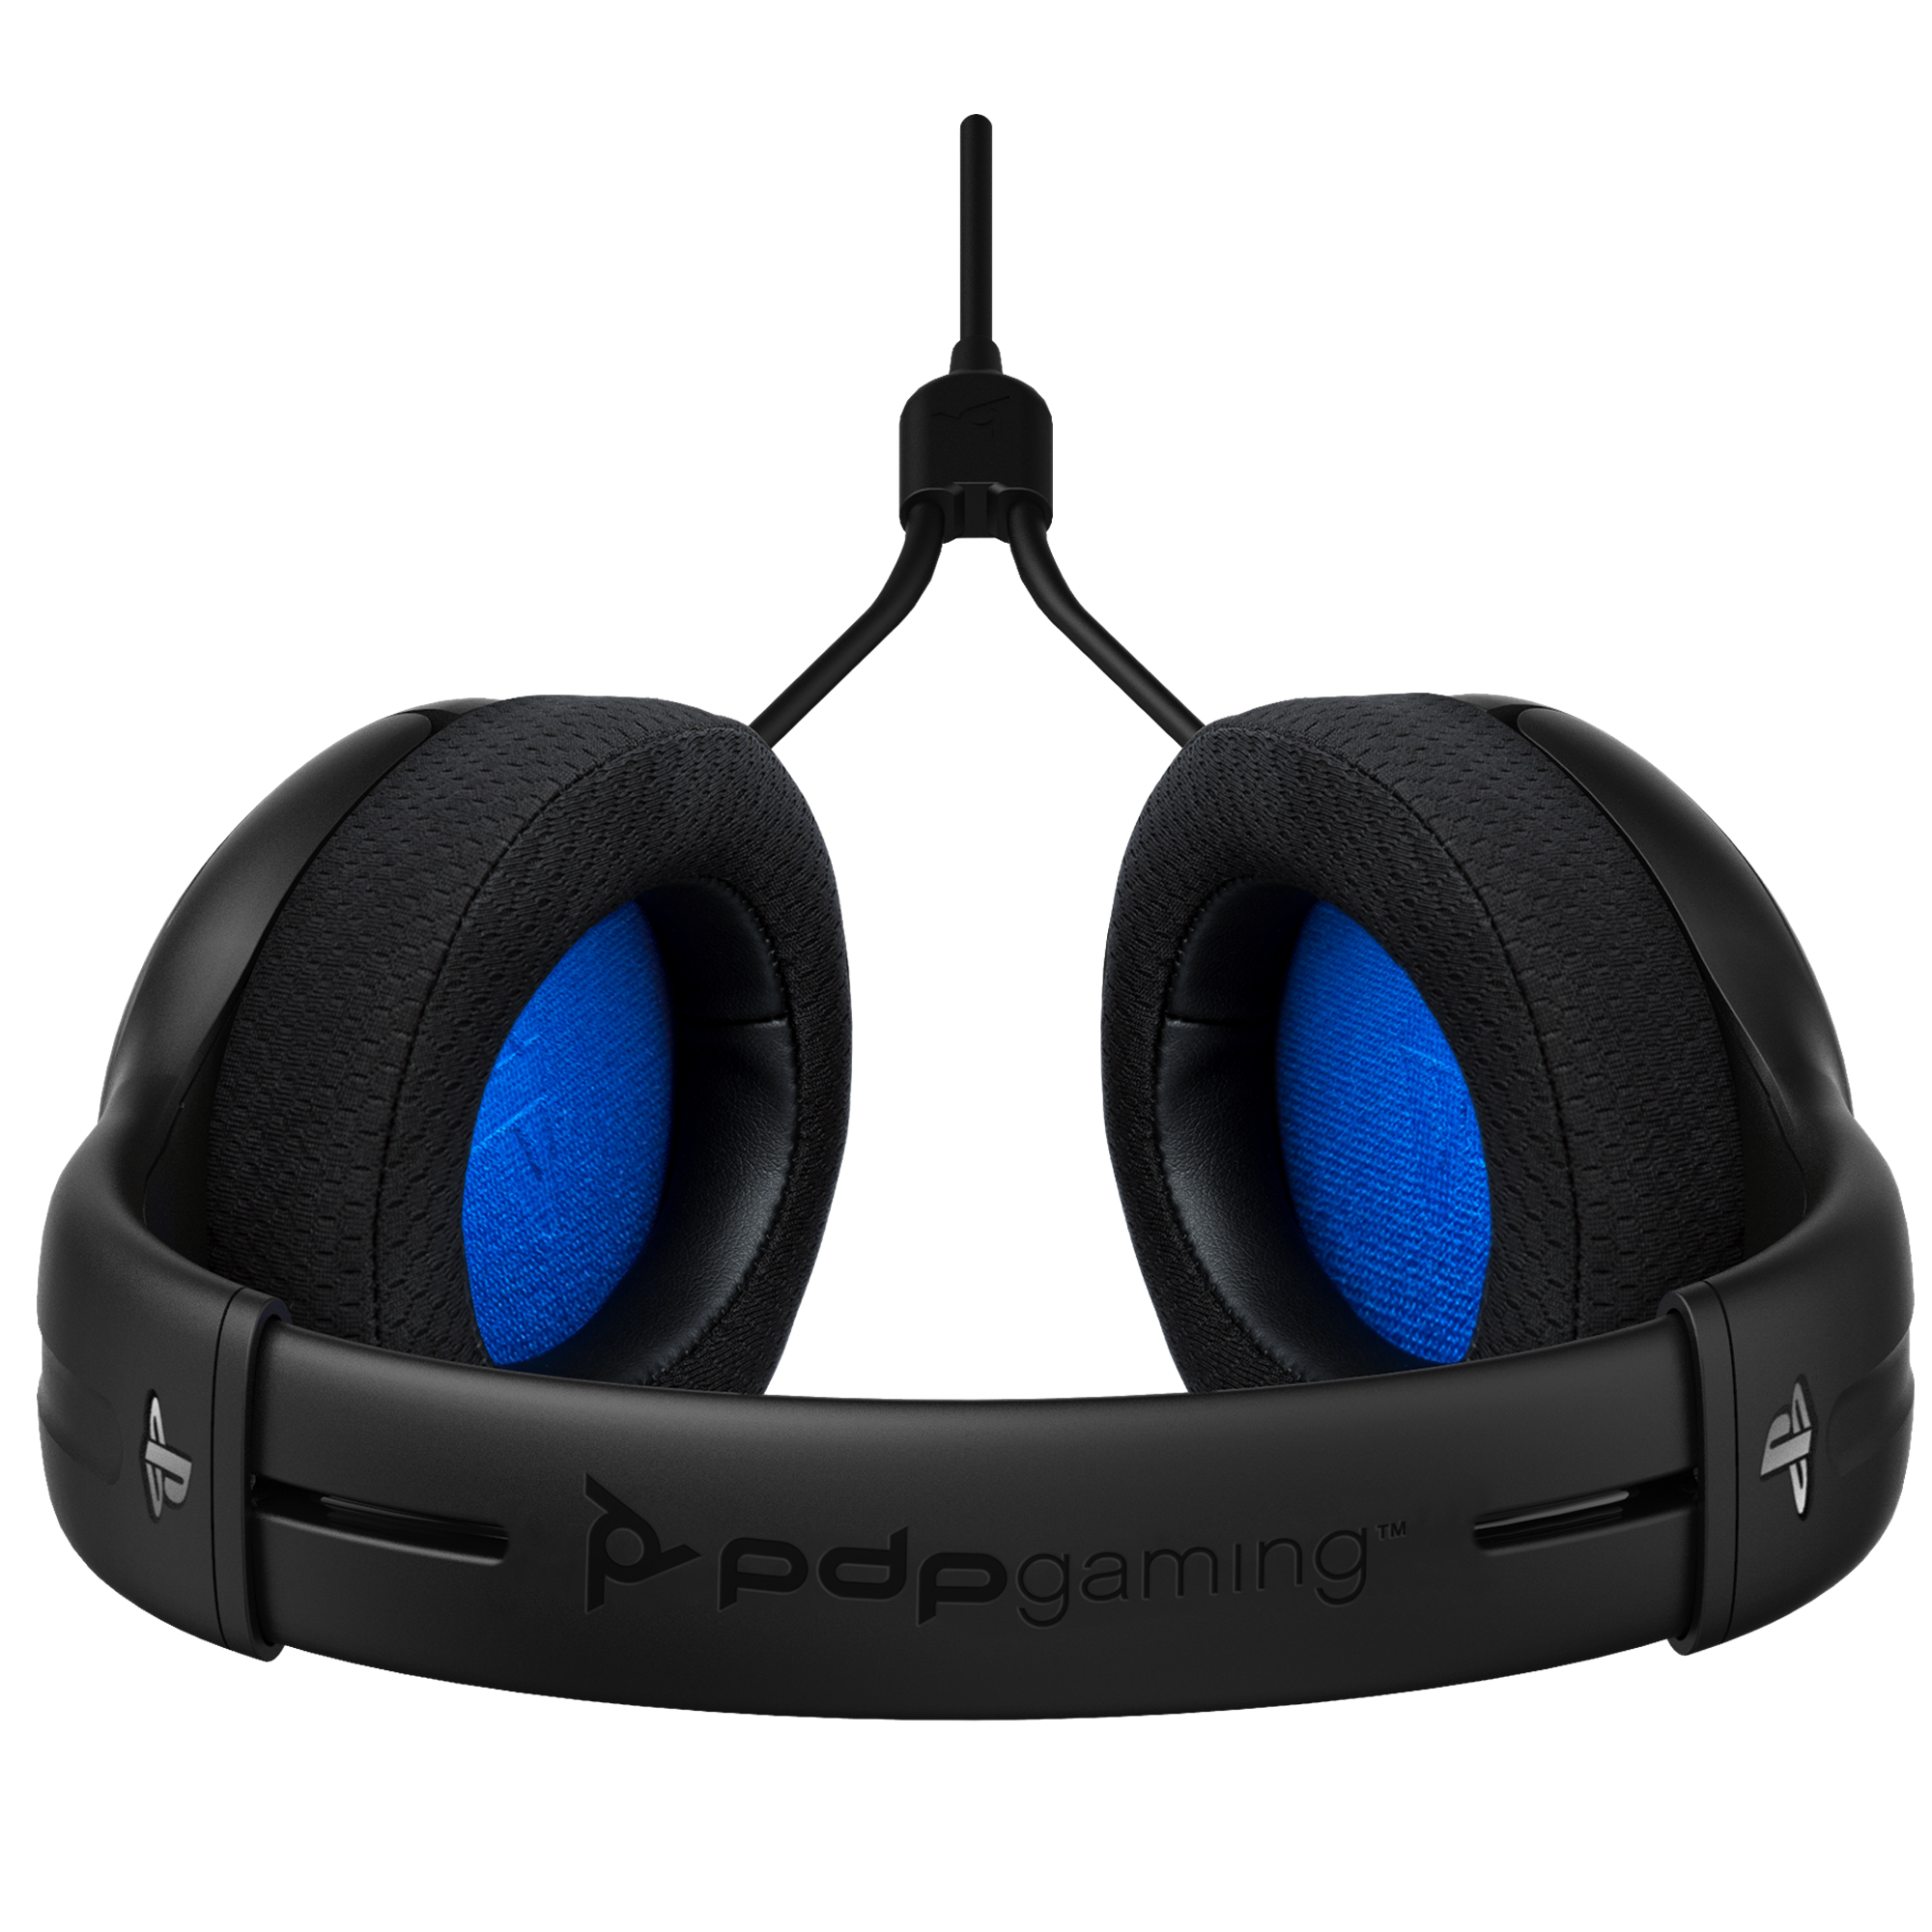  PDP AIRLITE Wired Stereo Gaming Playstation Headset with Noise  Cancelling Boom Microphone: PS5/PS4 (Frost White) : Todo lo demás